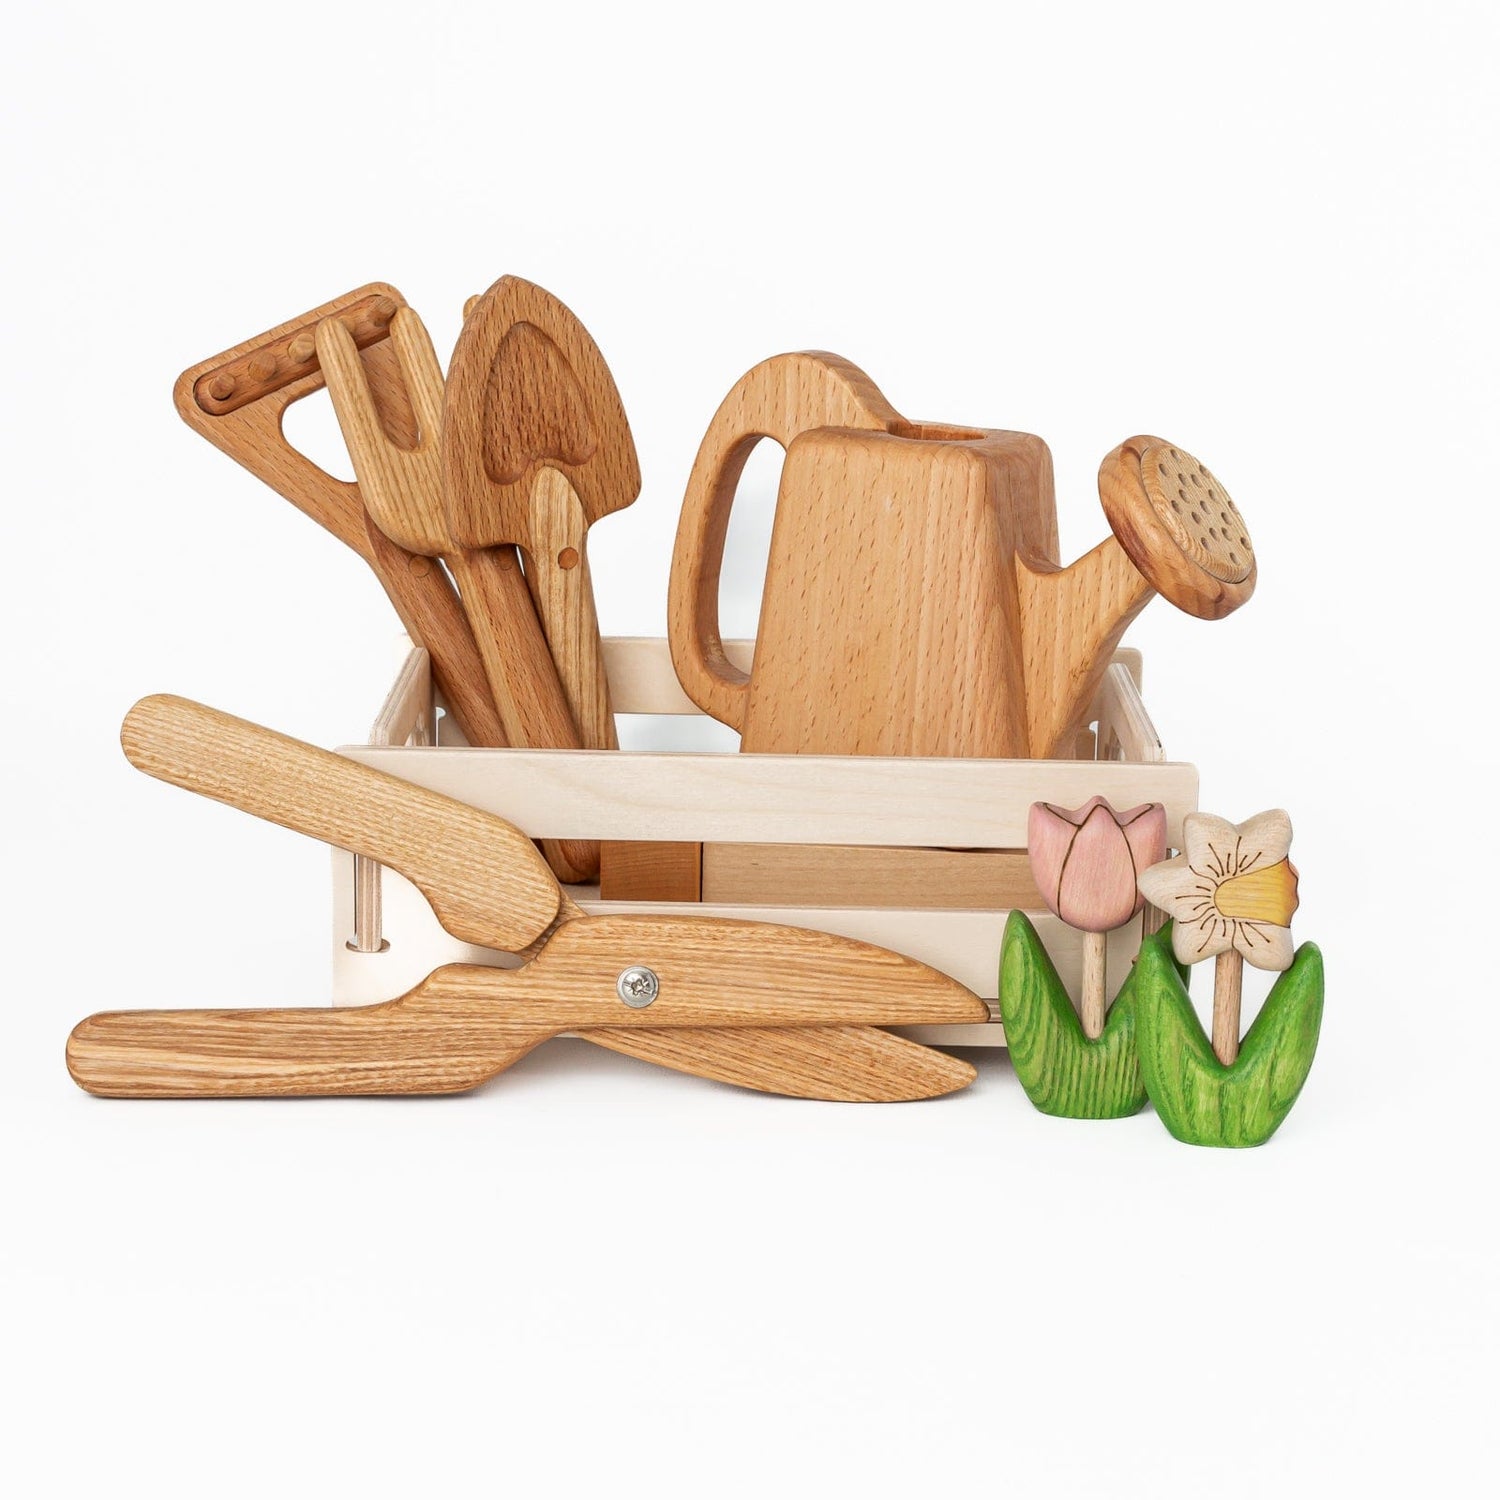 Wooden Toys Collection  Wooden Toys For Kids – The Playful Peacock